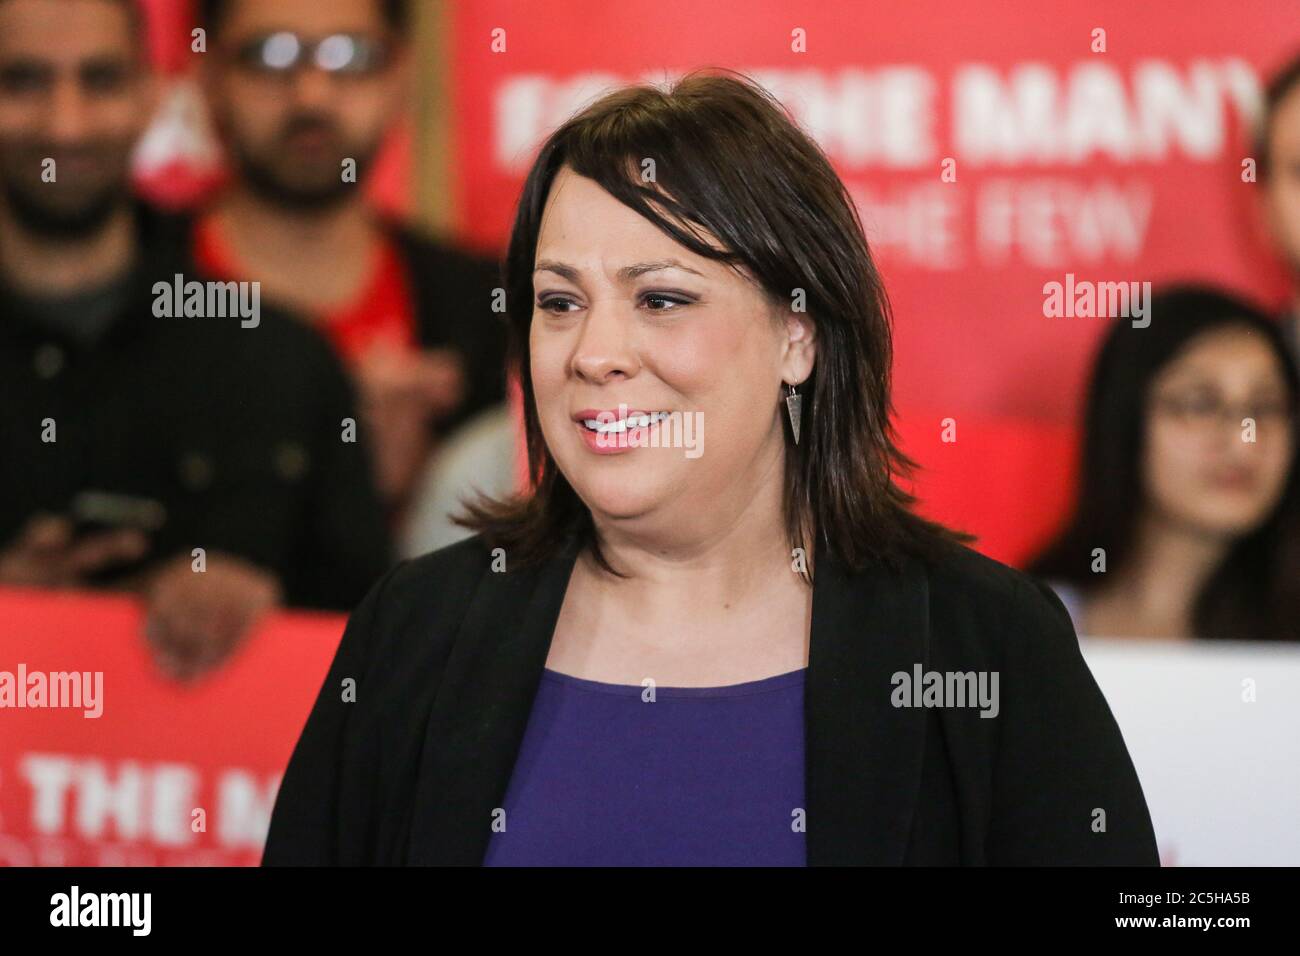 Labour MP for Dewsbury Paula Sherriff at an event in Batley, West Yorkshire, to launch Labour's policy on healthcare and the NHS during the 2017 Gener Stock Photo